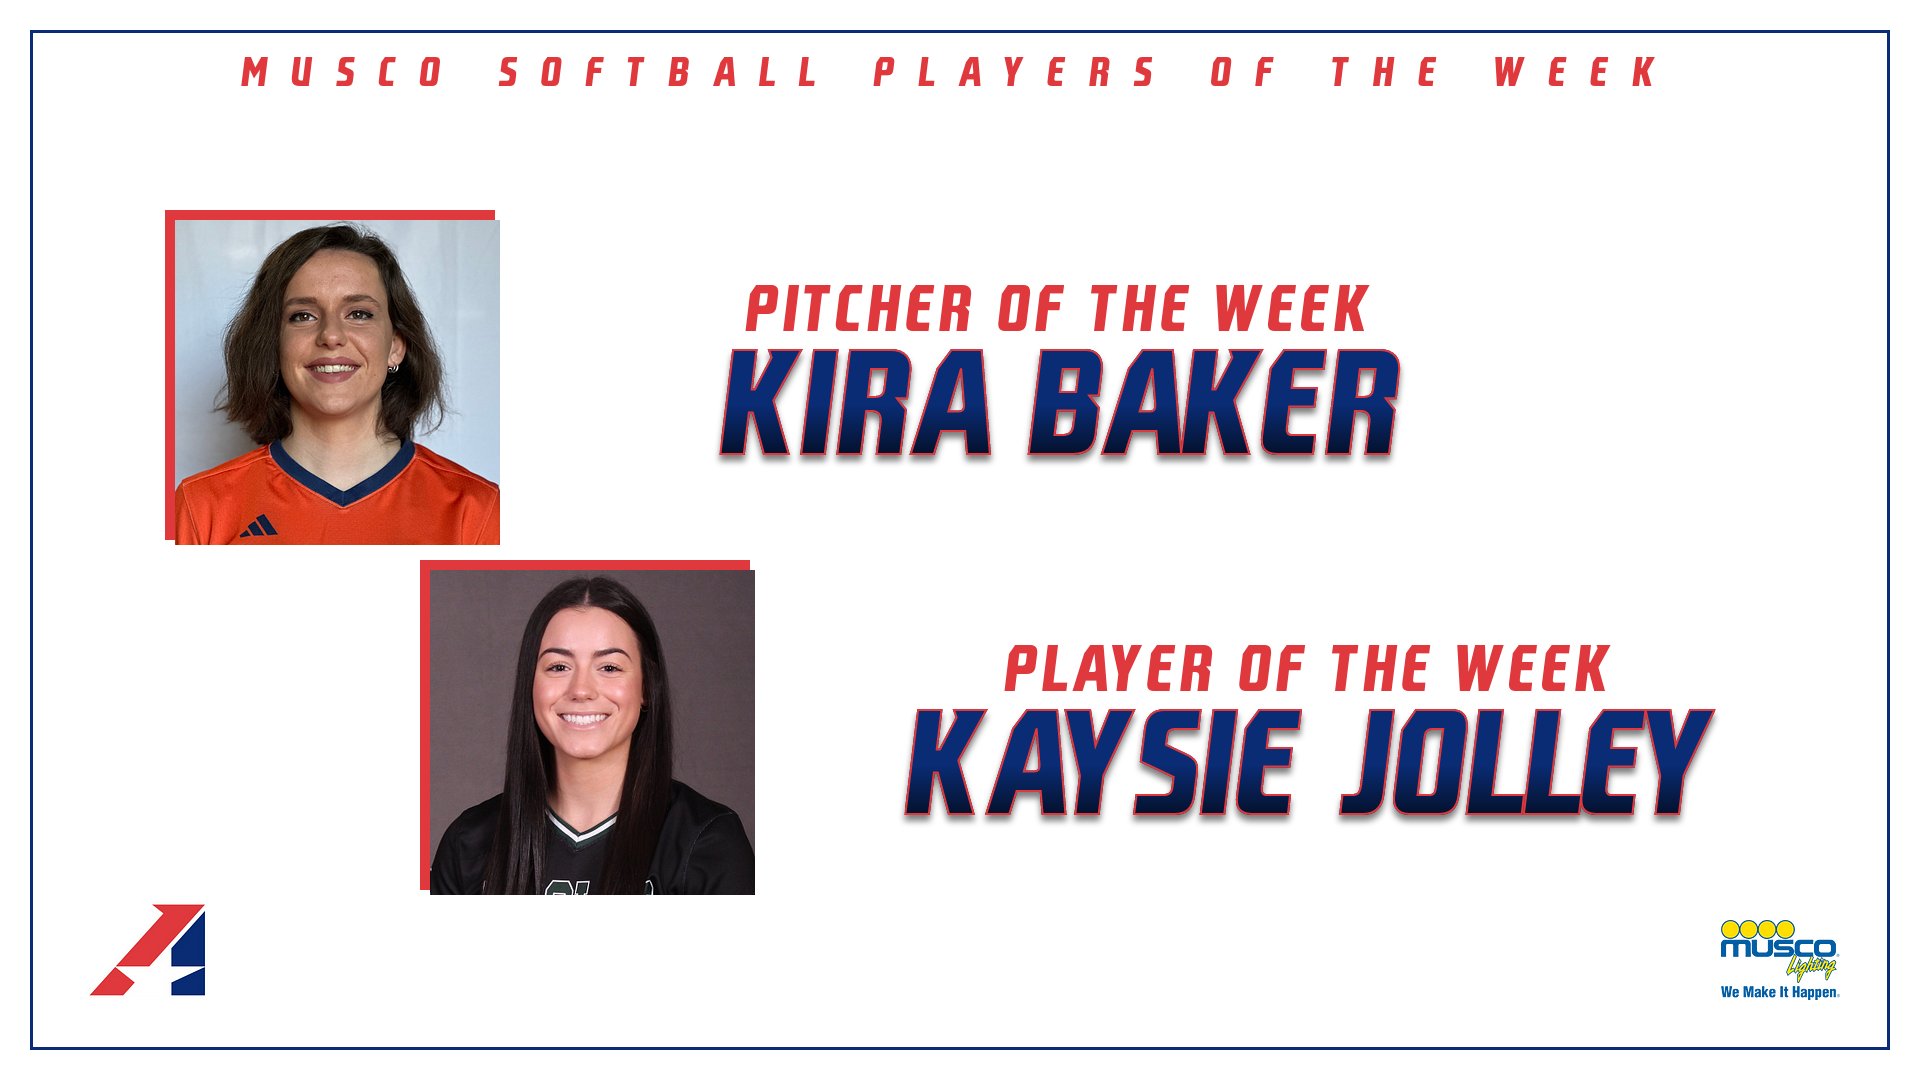 Kira Baker, Kaysie Jolley Selected Musco Softball Pitcher and Player of the Week